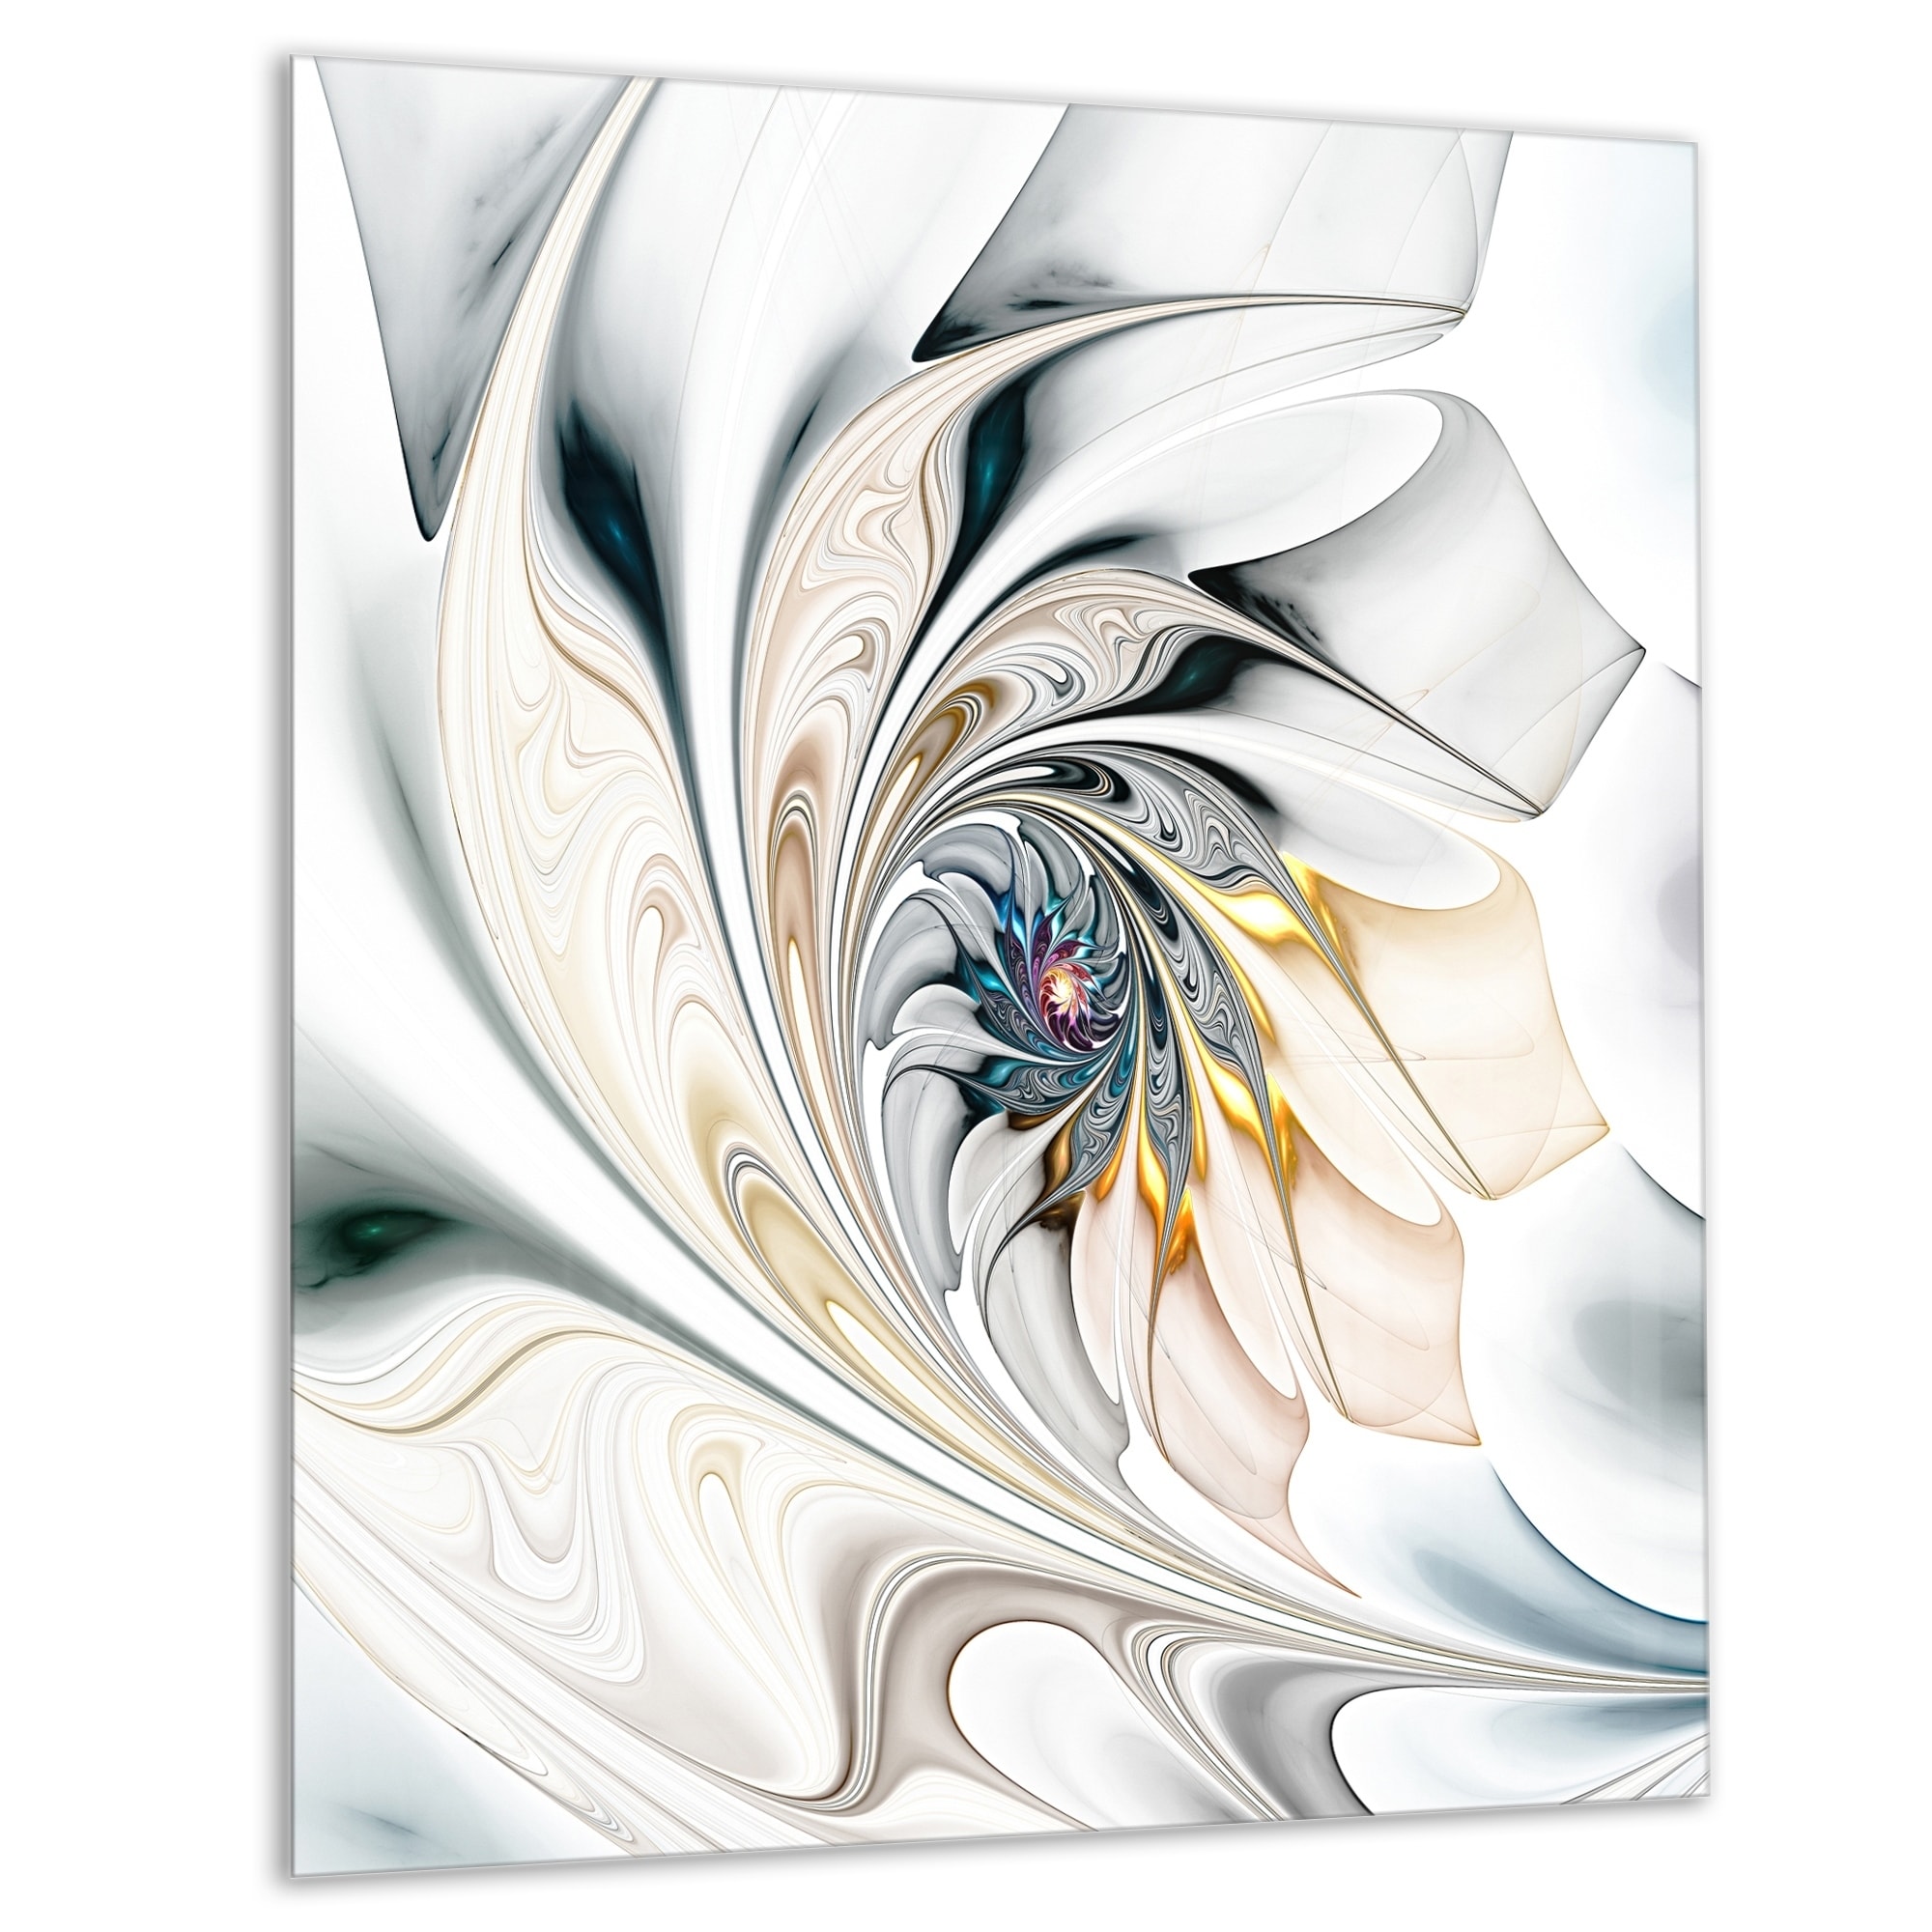 Shop White Stained Glass Floral Art Large Floral Glossy Metal Wall Art Overstock 12778087